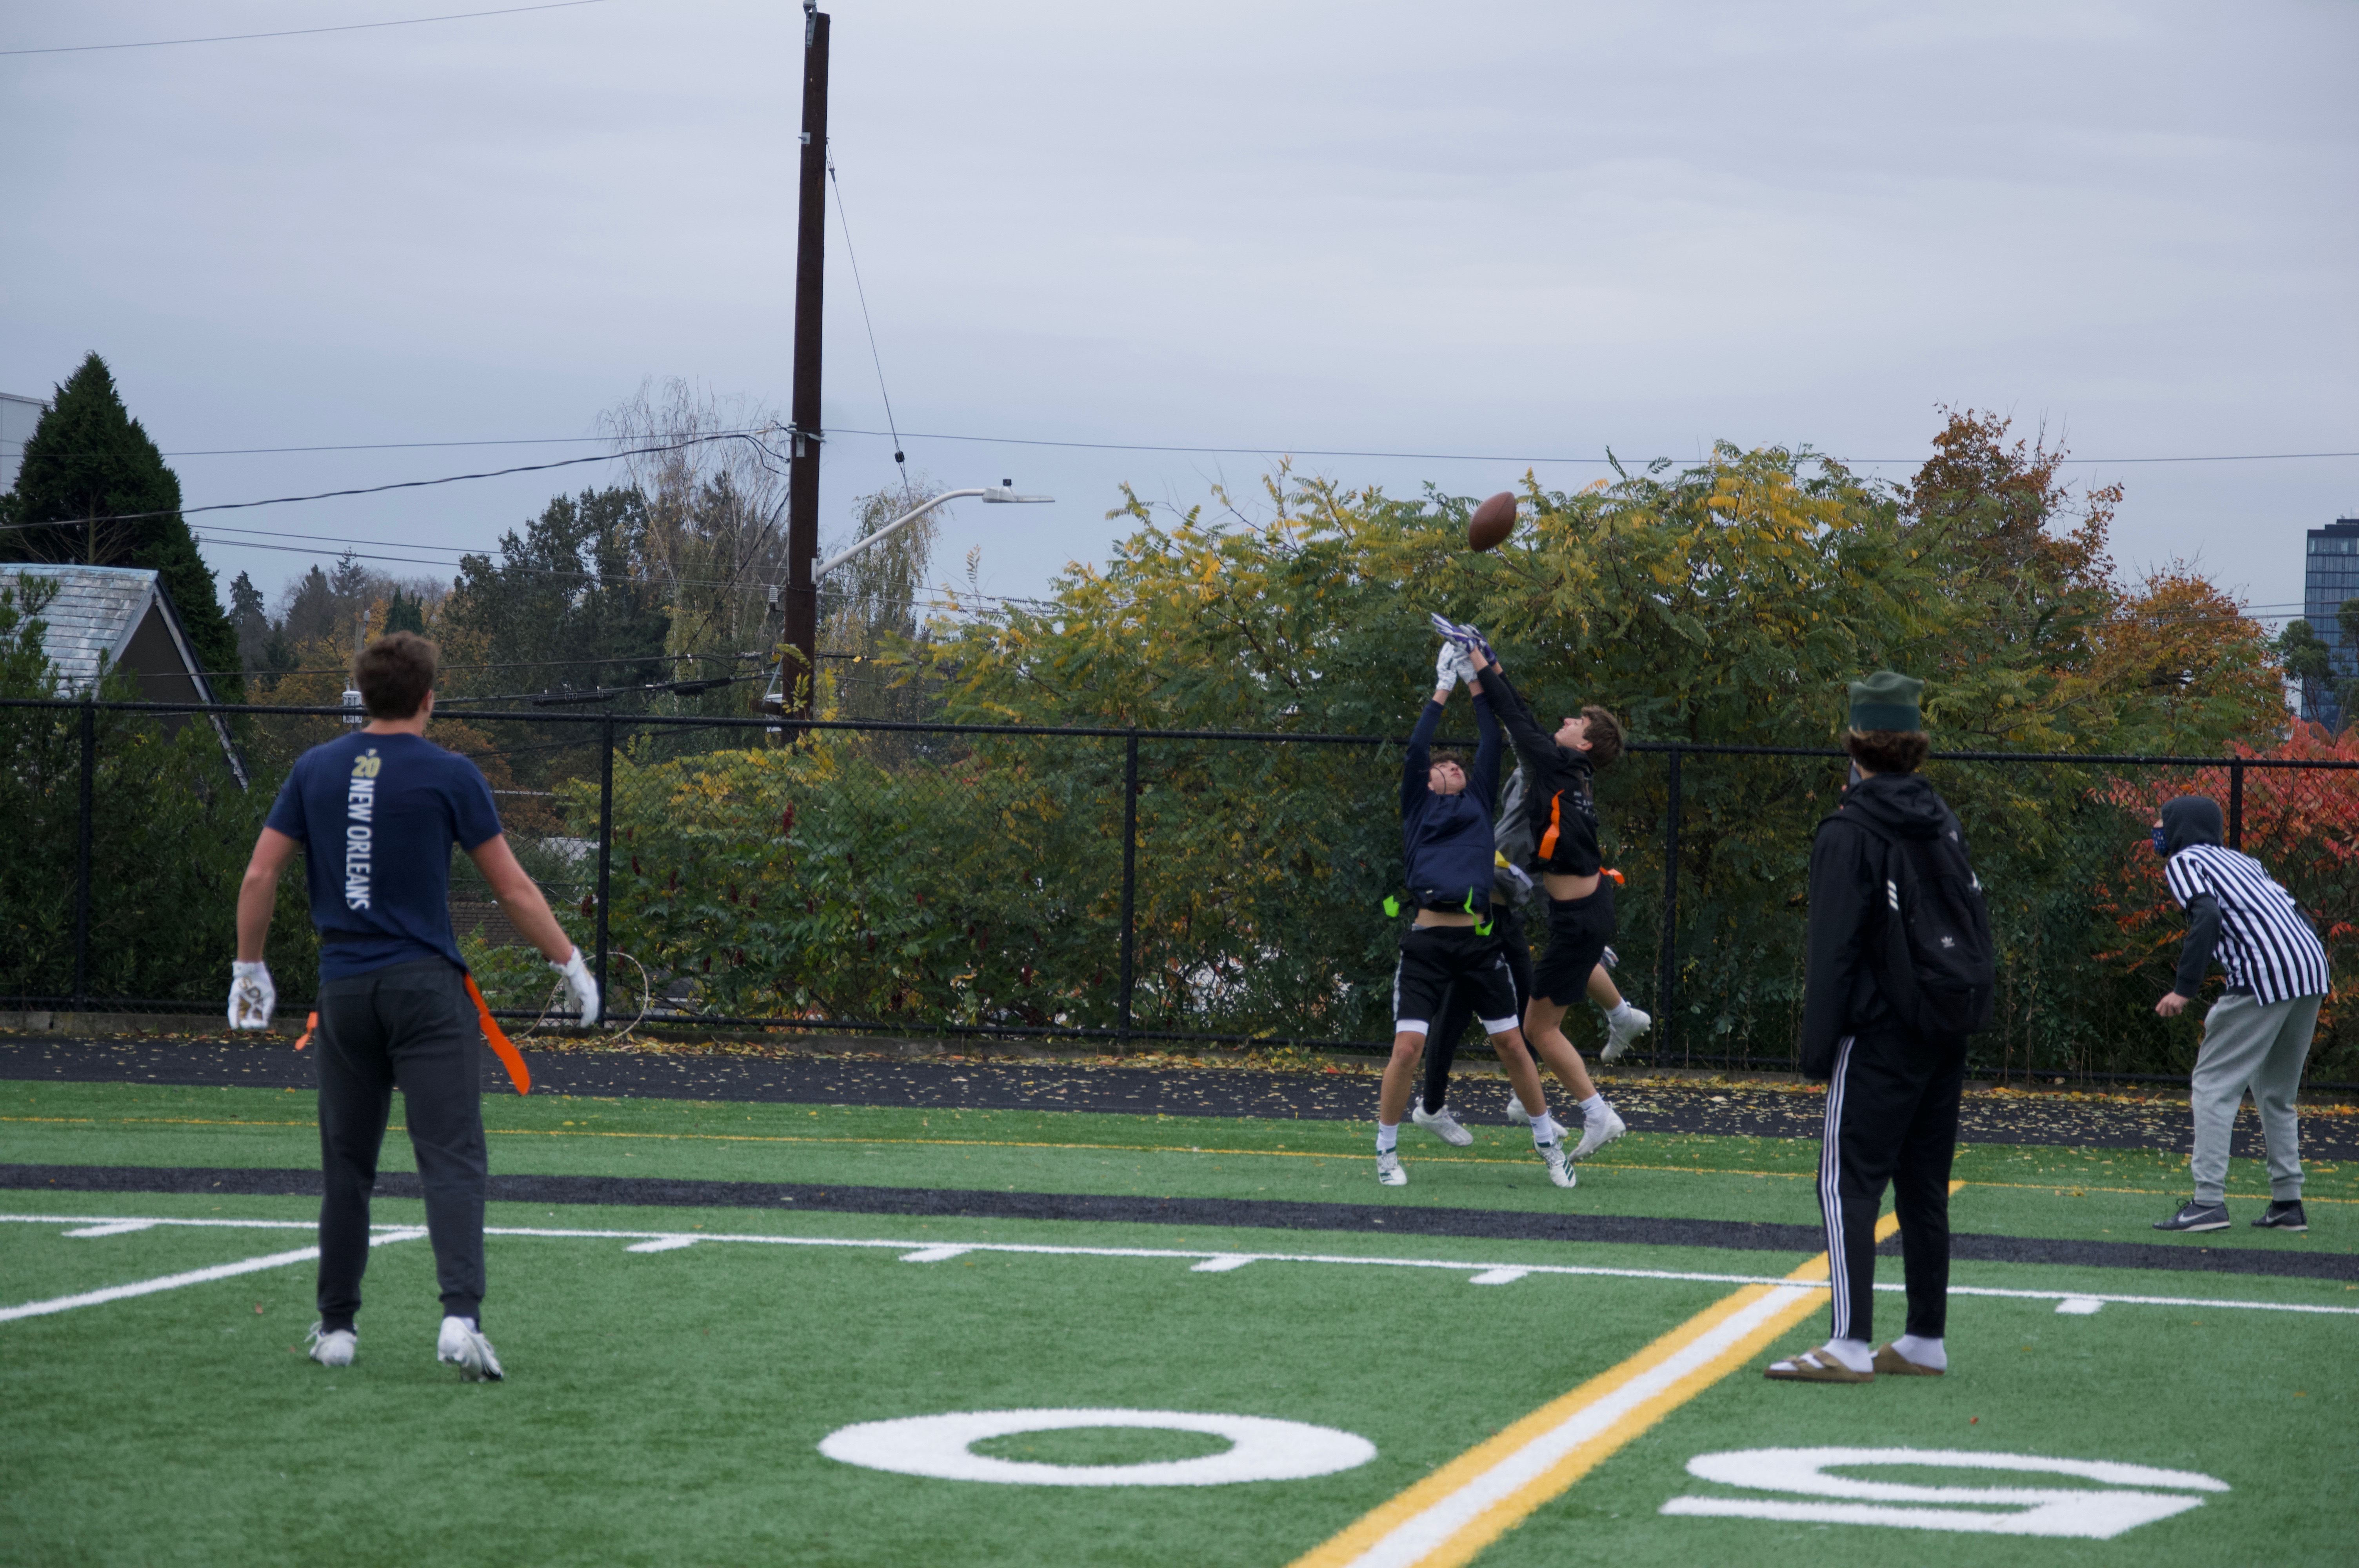 While RHS sports are on hold, one student-led flag football team continues to play